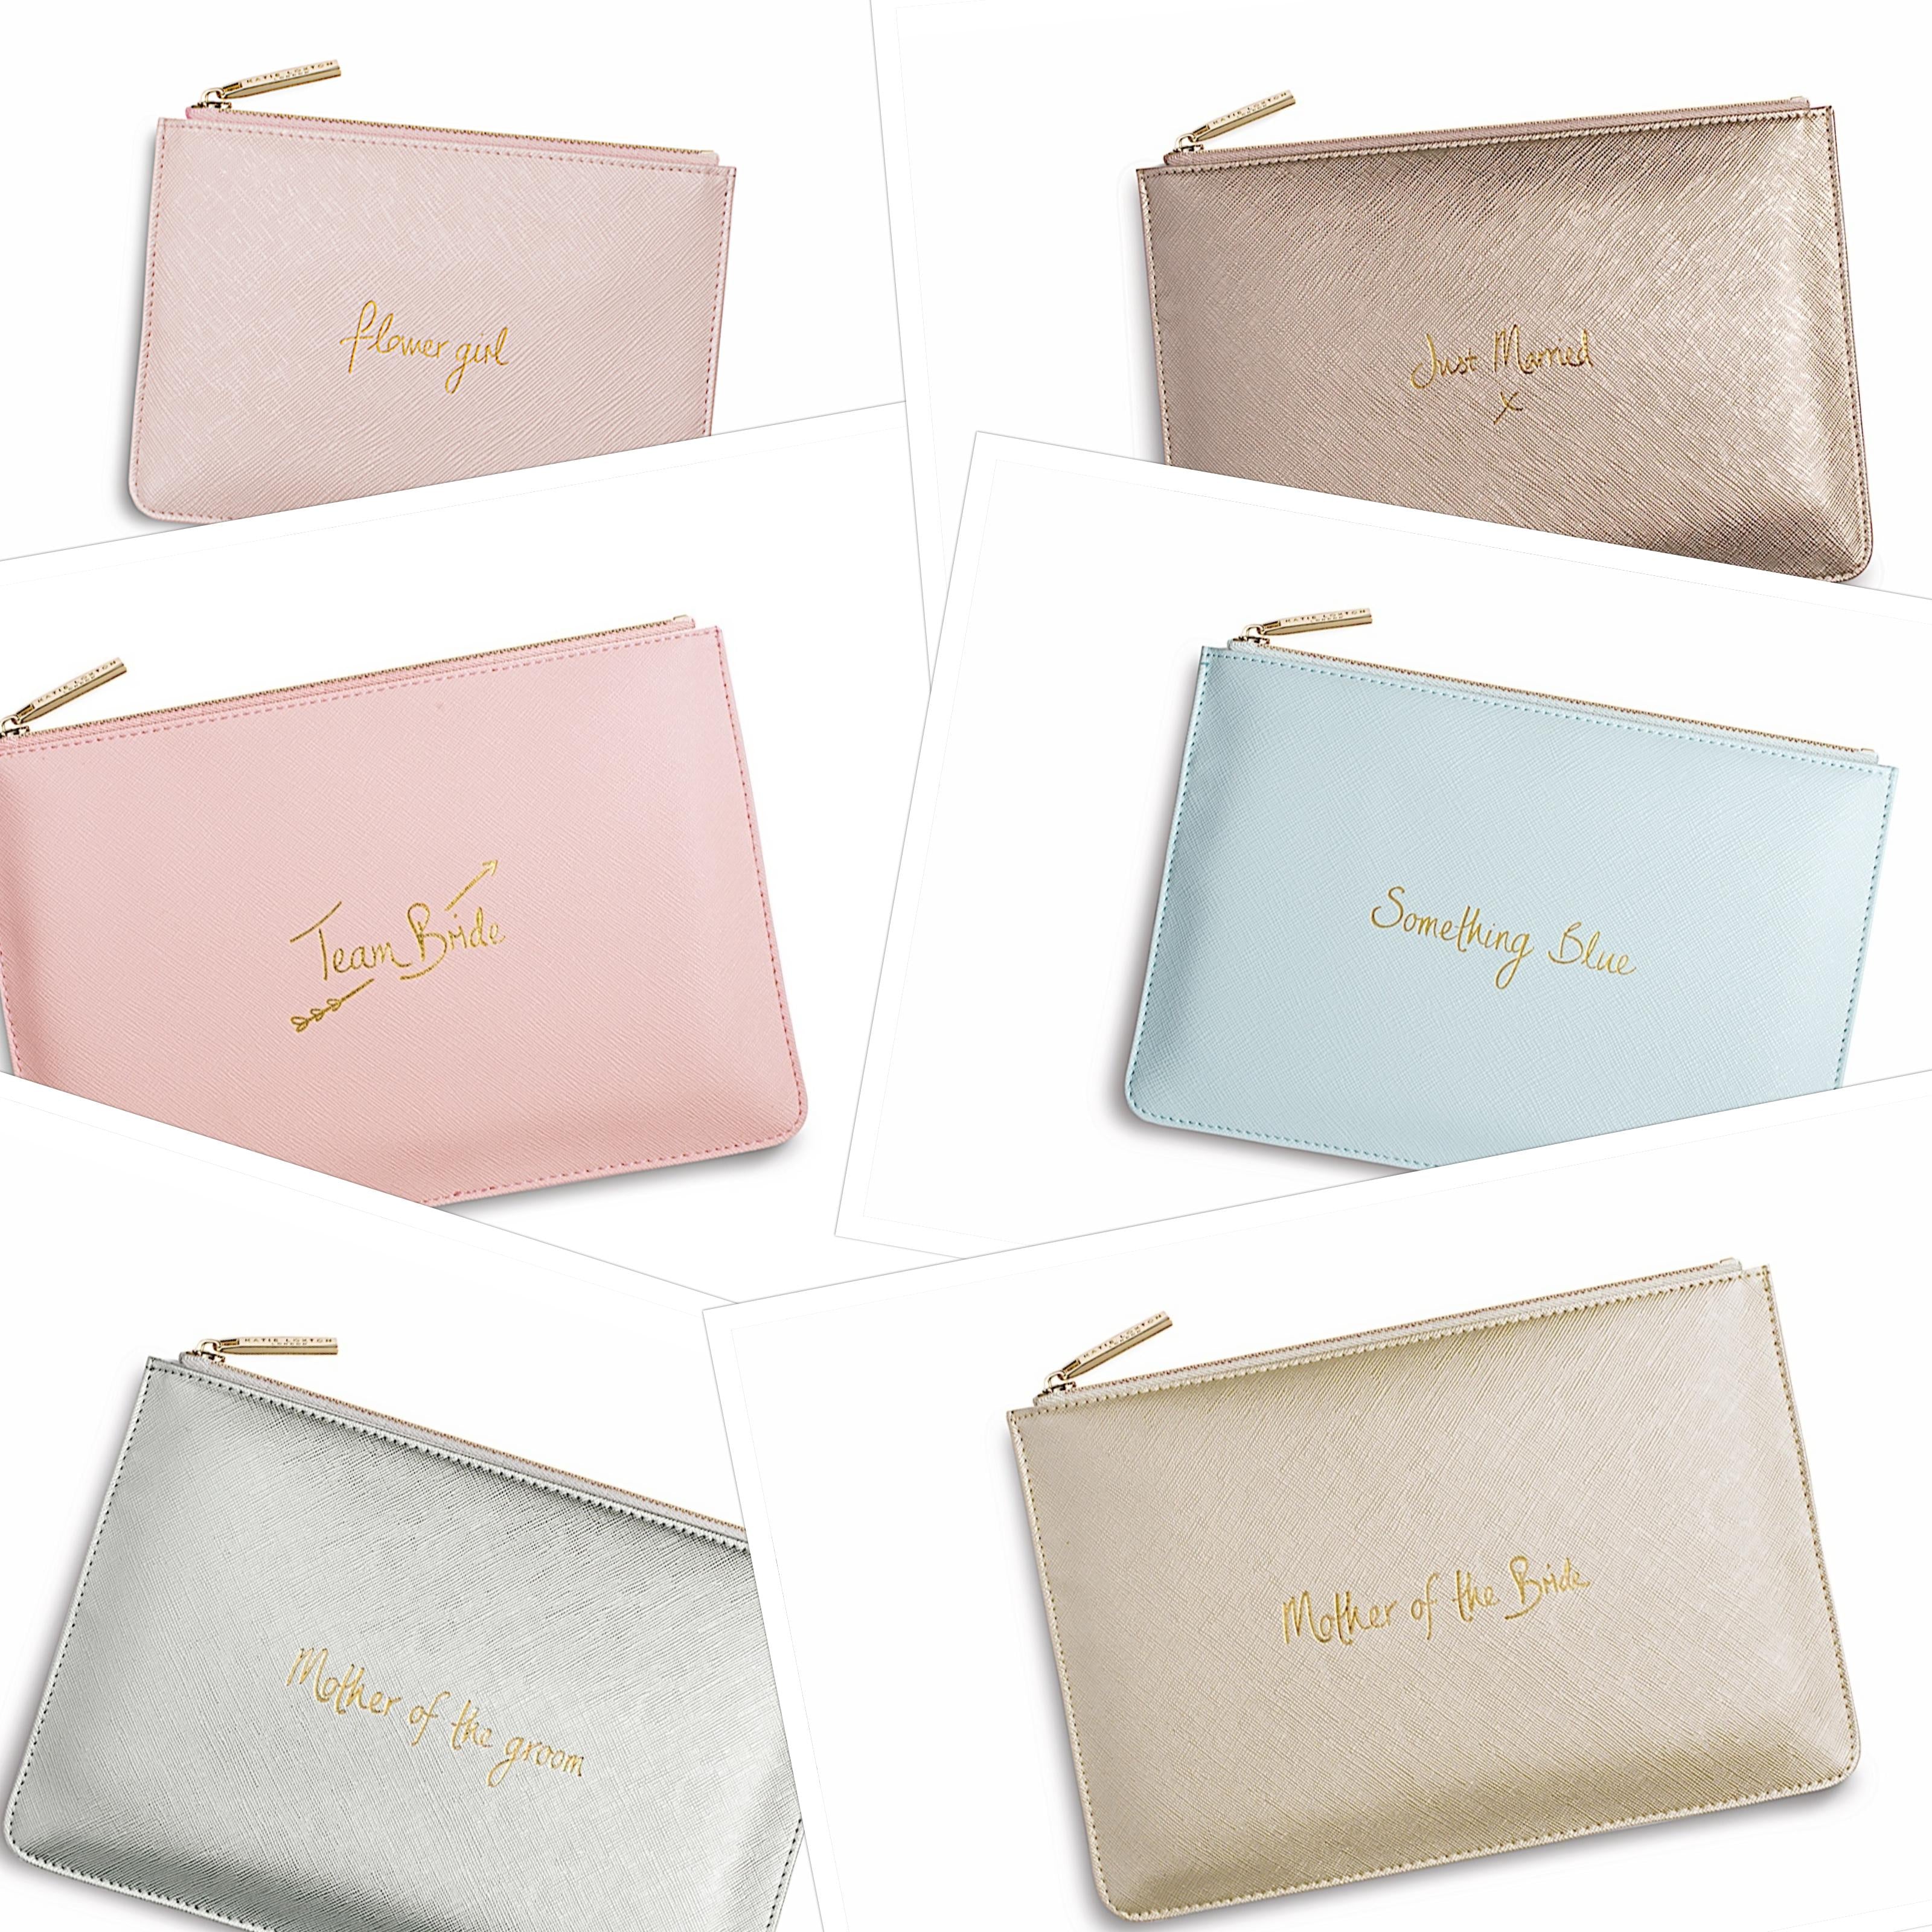 Our Top Five Picks from the New Katie Loxton Collection